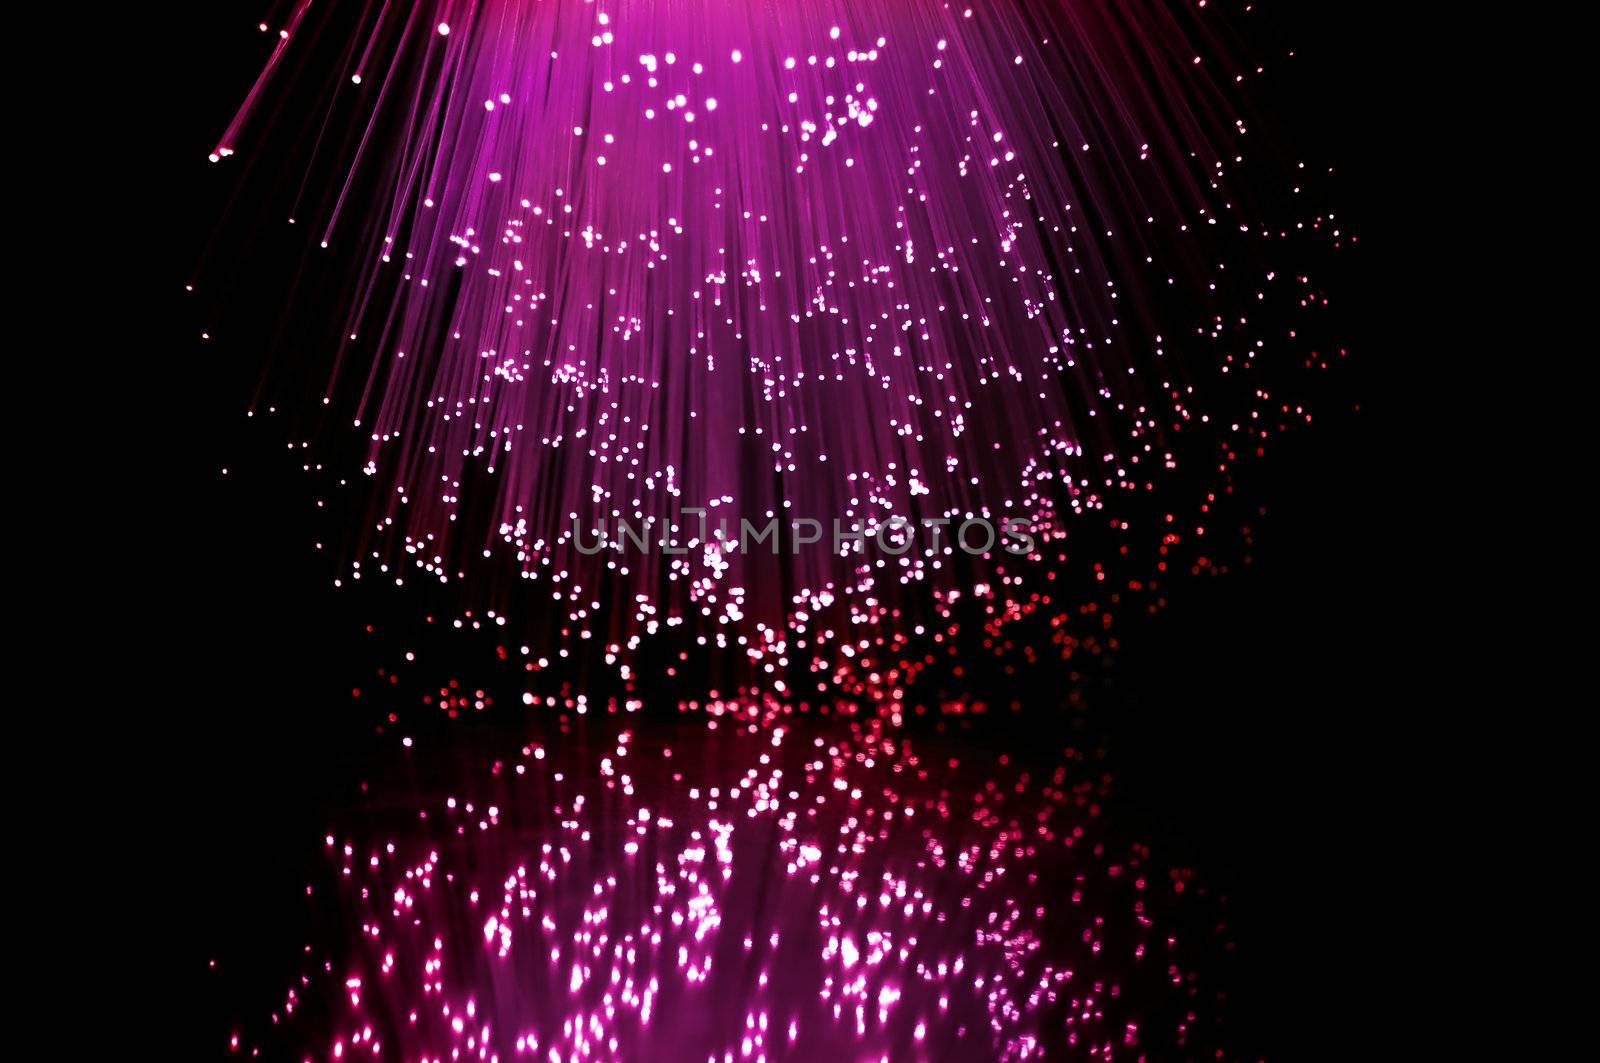 Pink and red fibre optic light strands reflecting in the foreground.